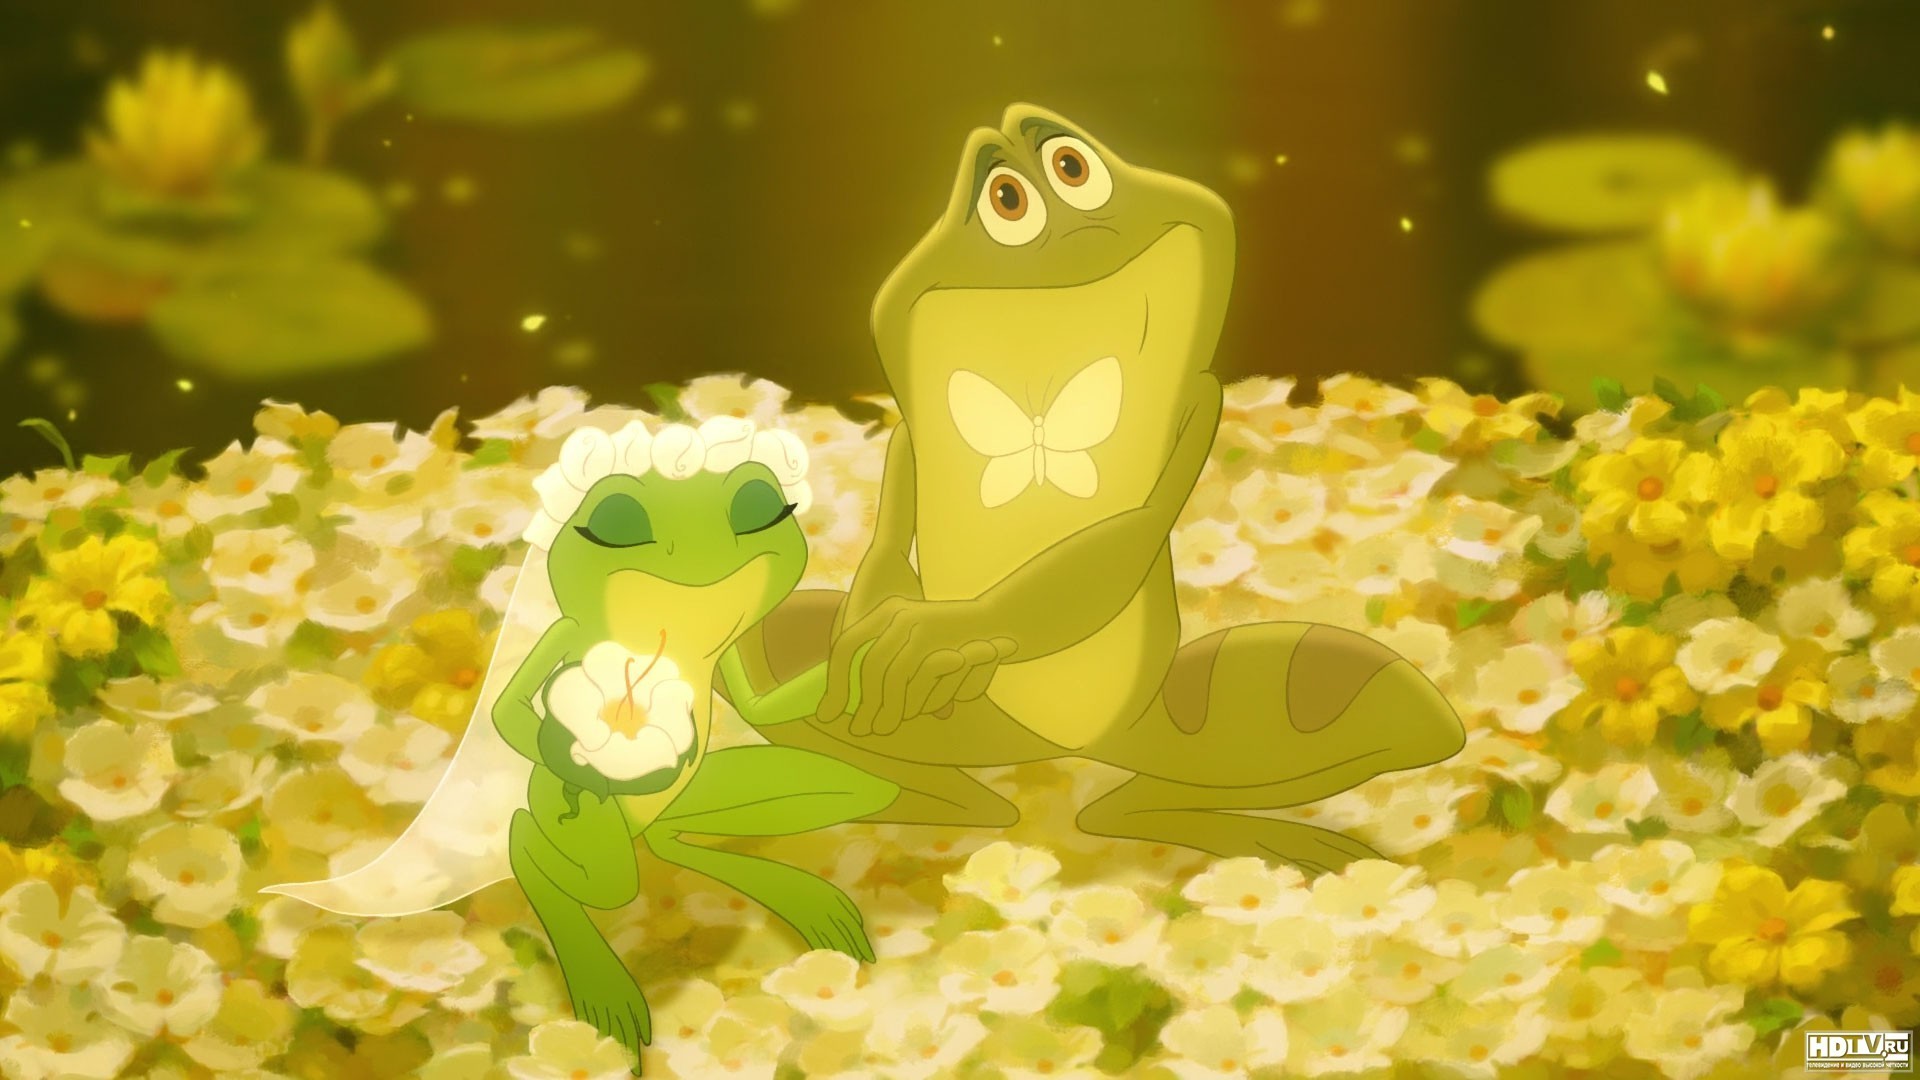 The Princess and the Frog desktop wallpaper for movie lovers.